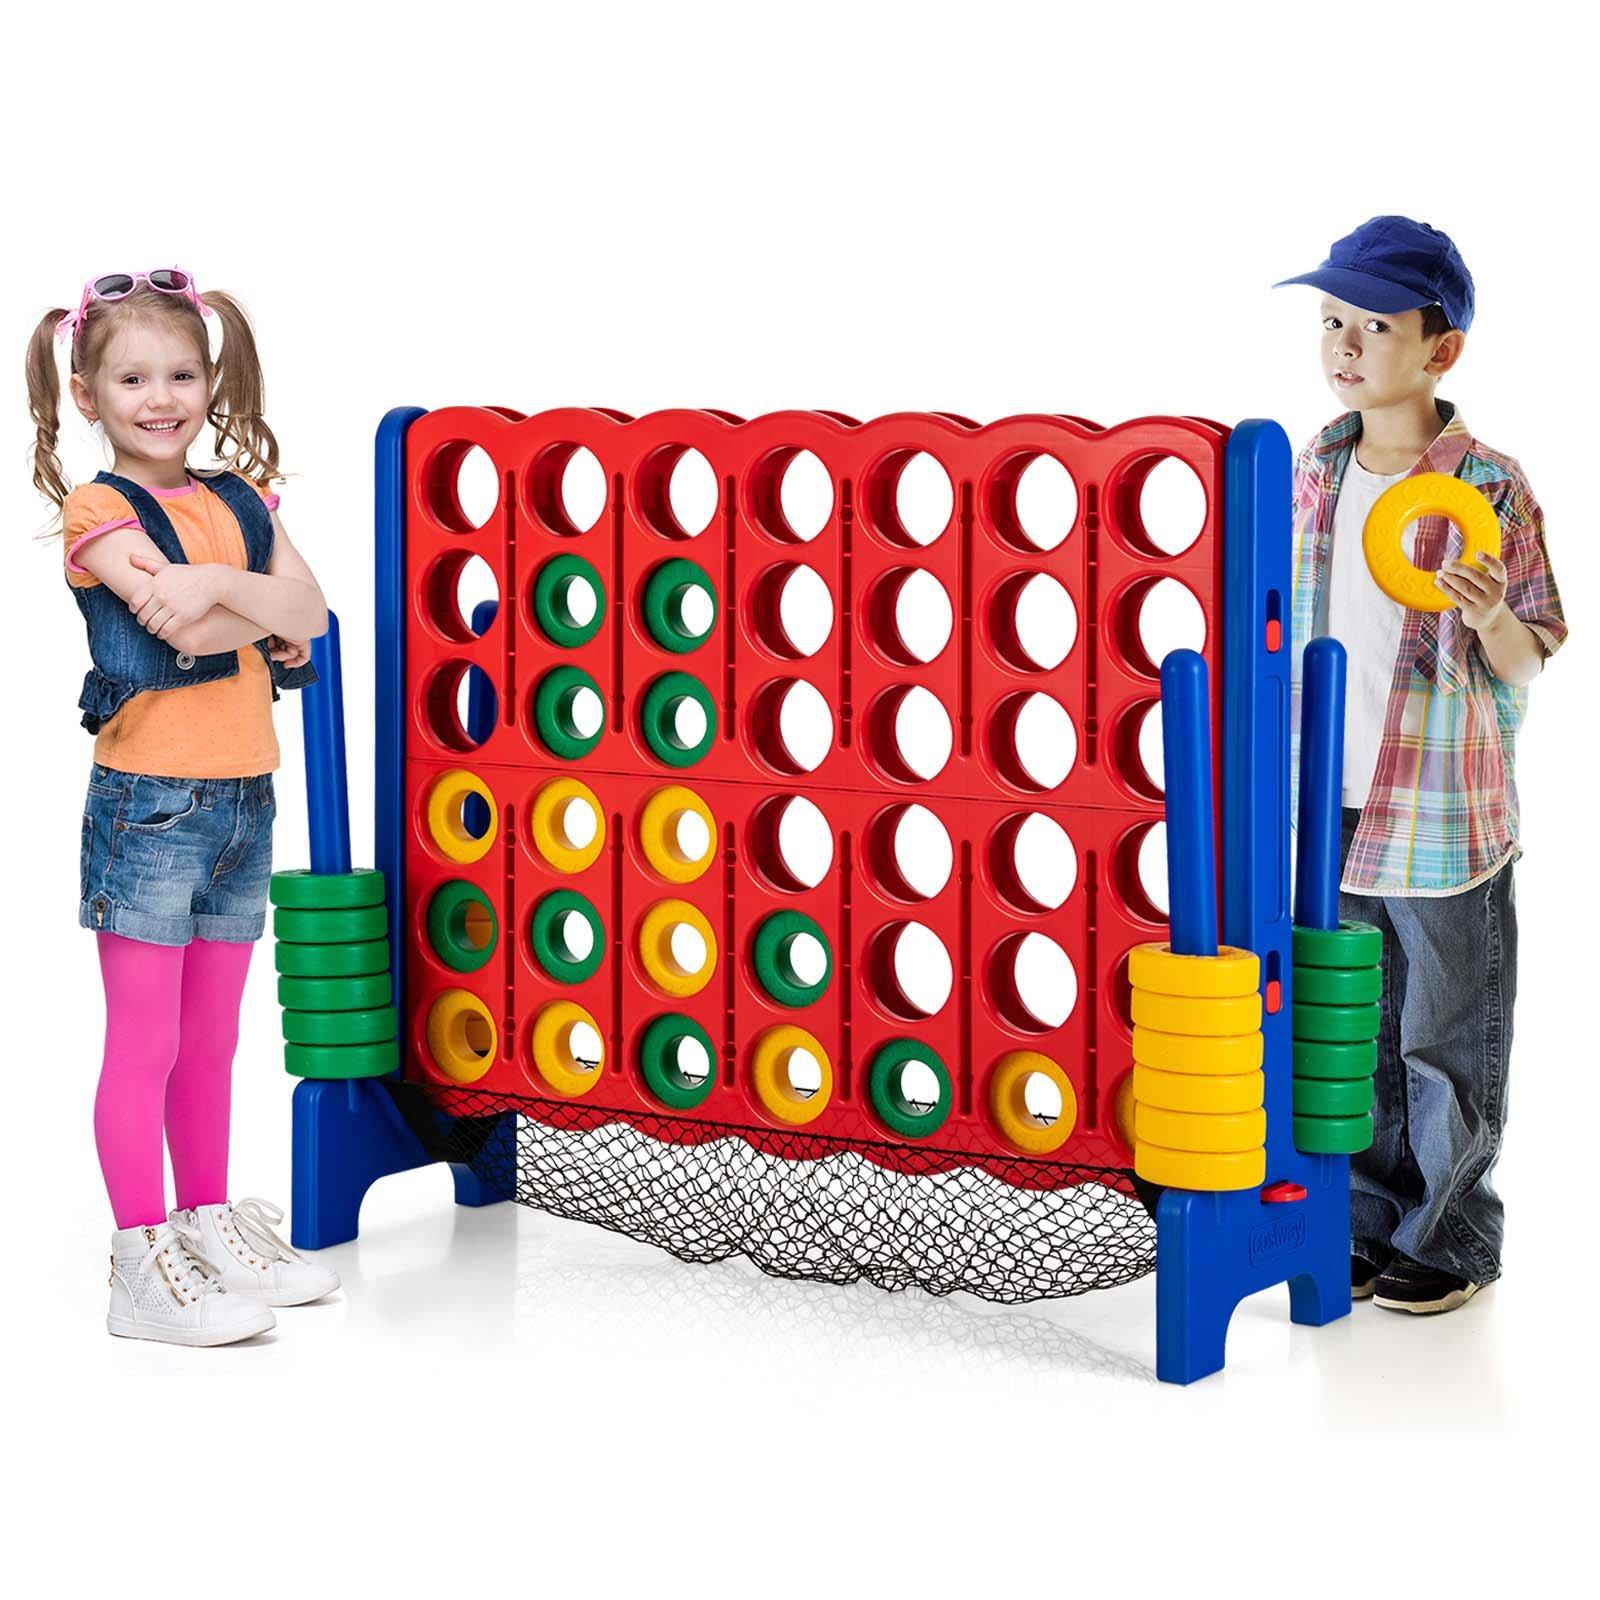 Jumbo 4-to-Score Giant Game Set with Carry Bag and Quick-Release Level for Kids Adults